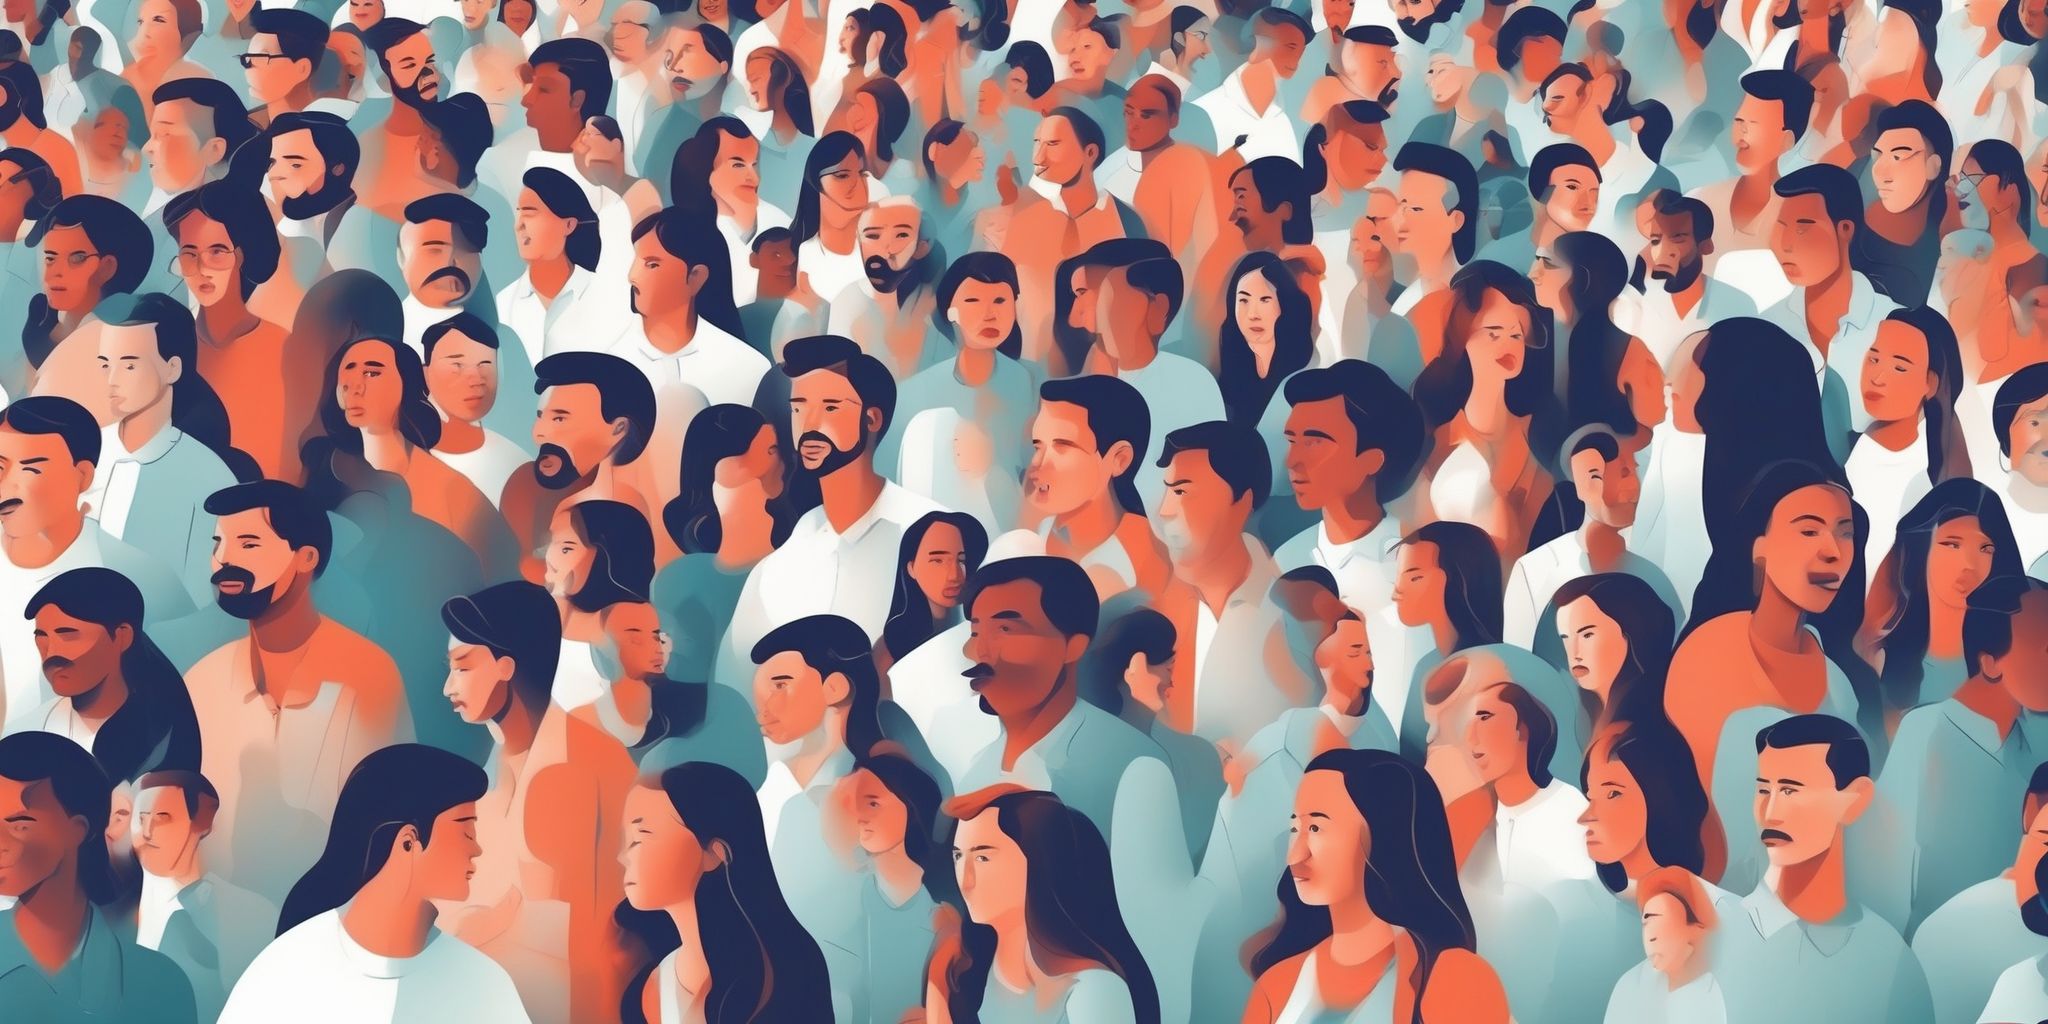 Crowd in illustration style with gradients and white background